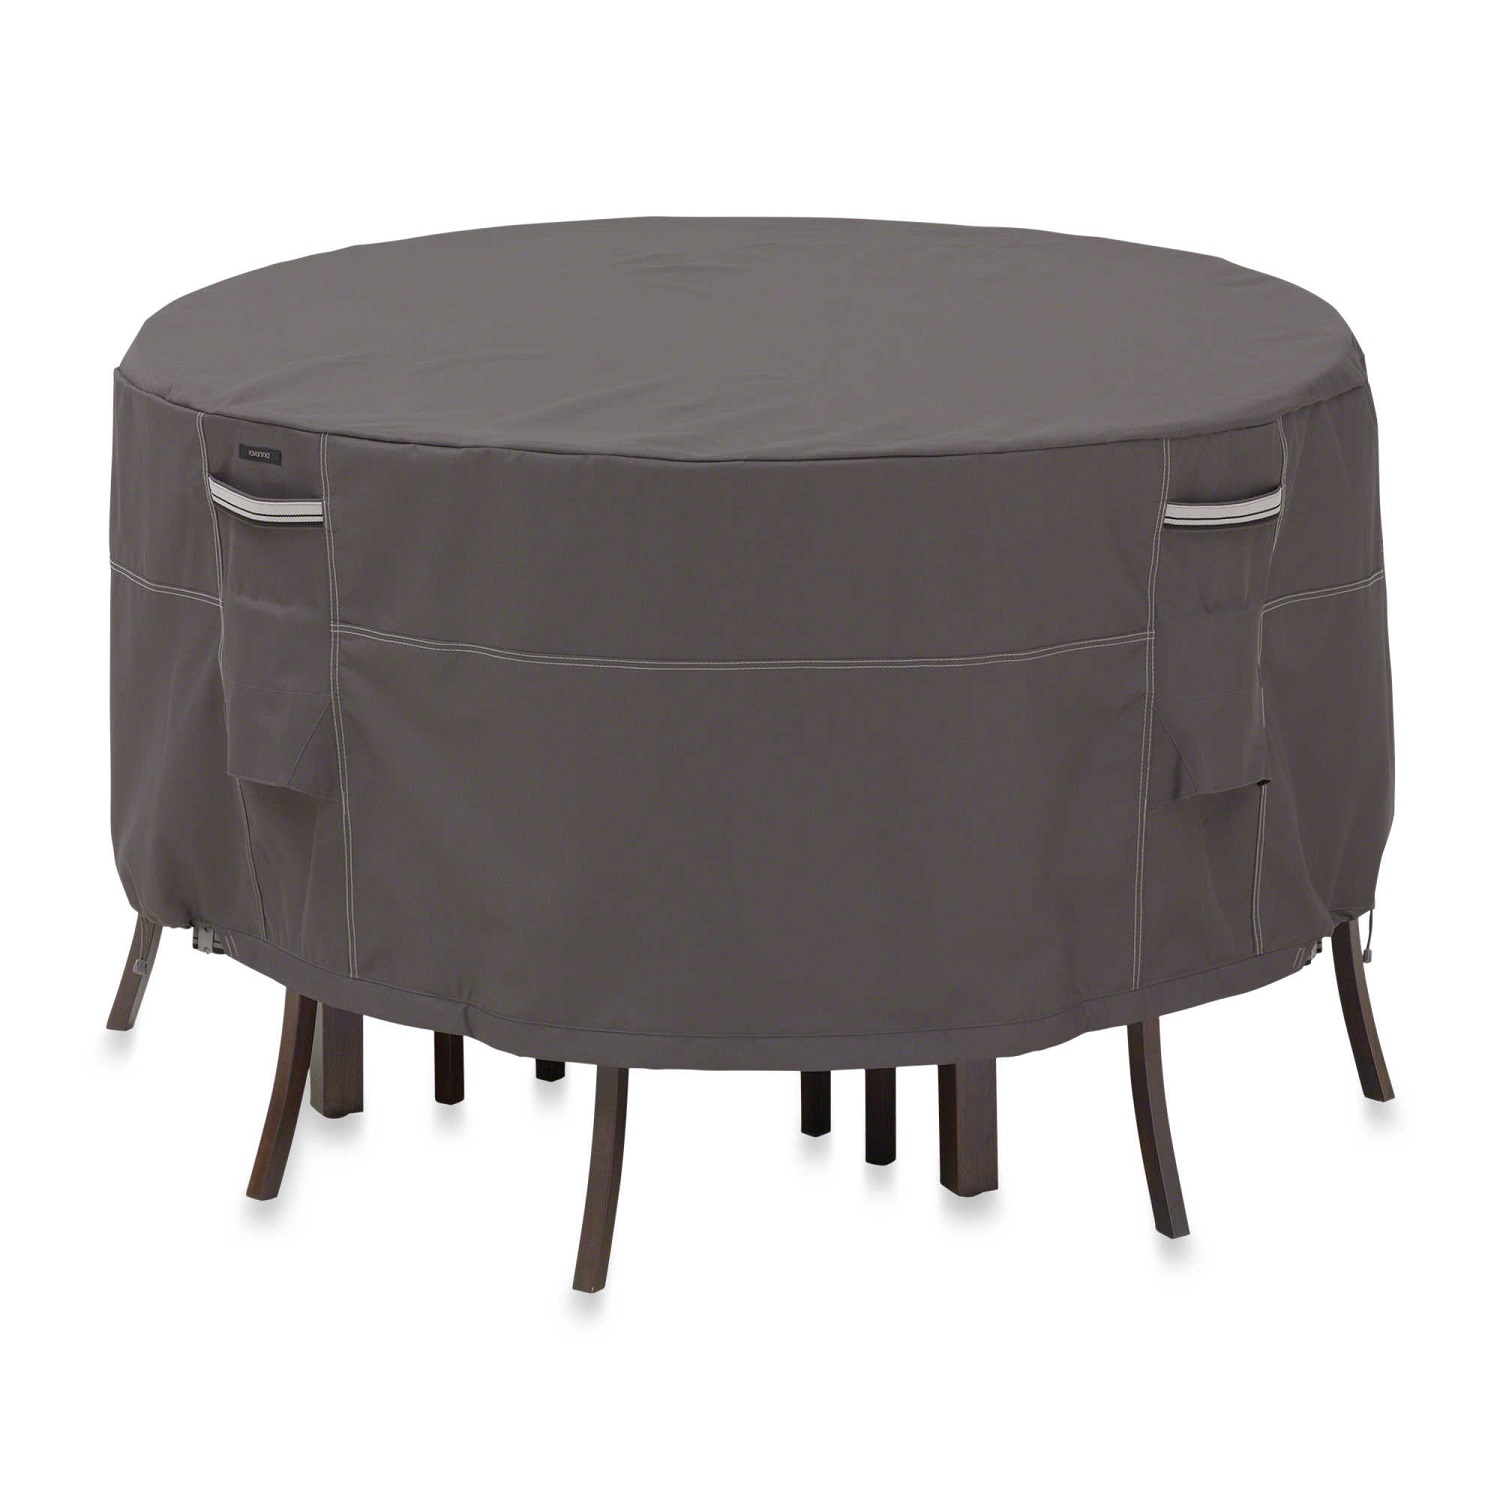 Classic Accessories Ravenna Patio Table & Chair Set Cover Round Large